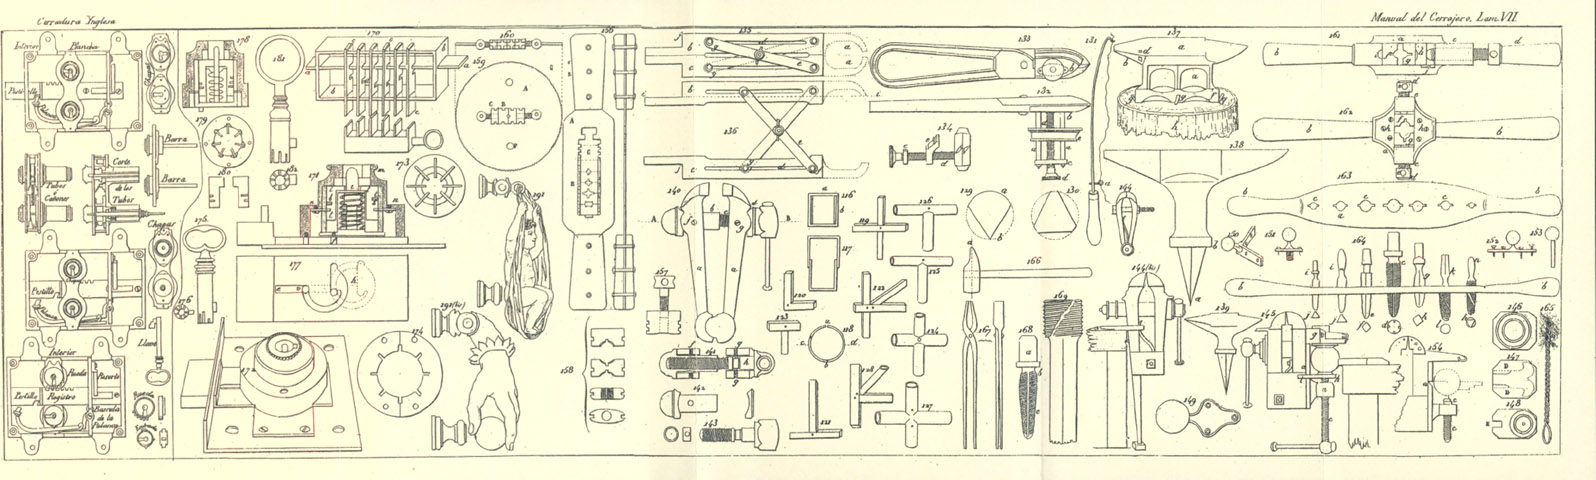 Illustration plate VII, double acting lock mechanisims, knocker and handle art, hand clamps, taps, threading tools, hammer, tongs, screw plates, anvil, vises, leg and unique early swivel ball.